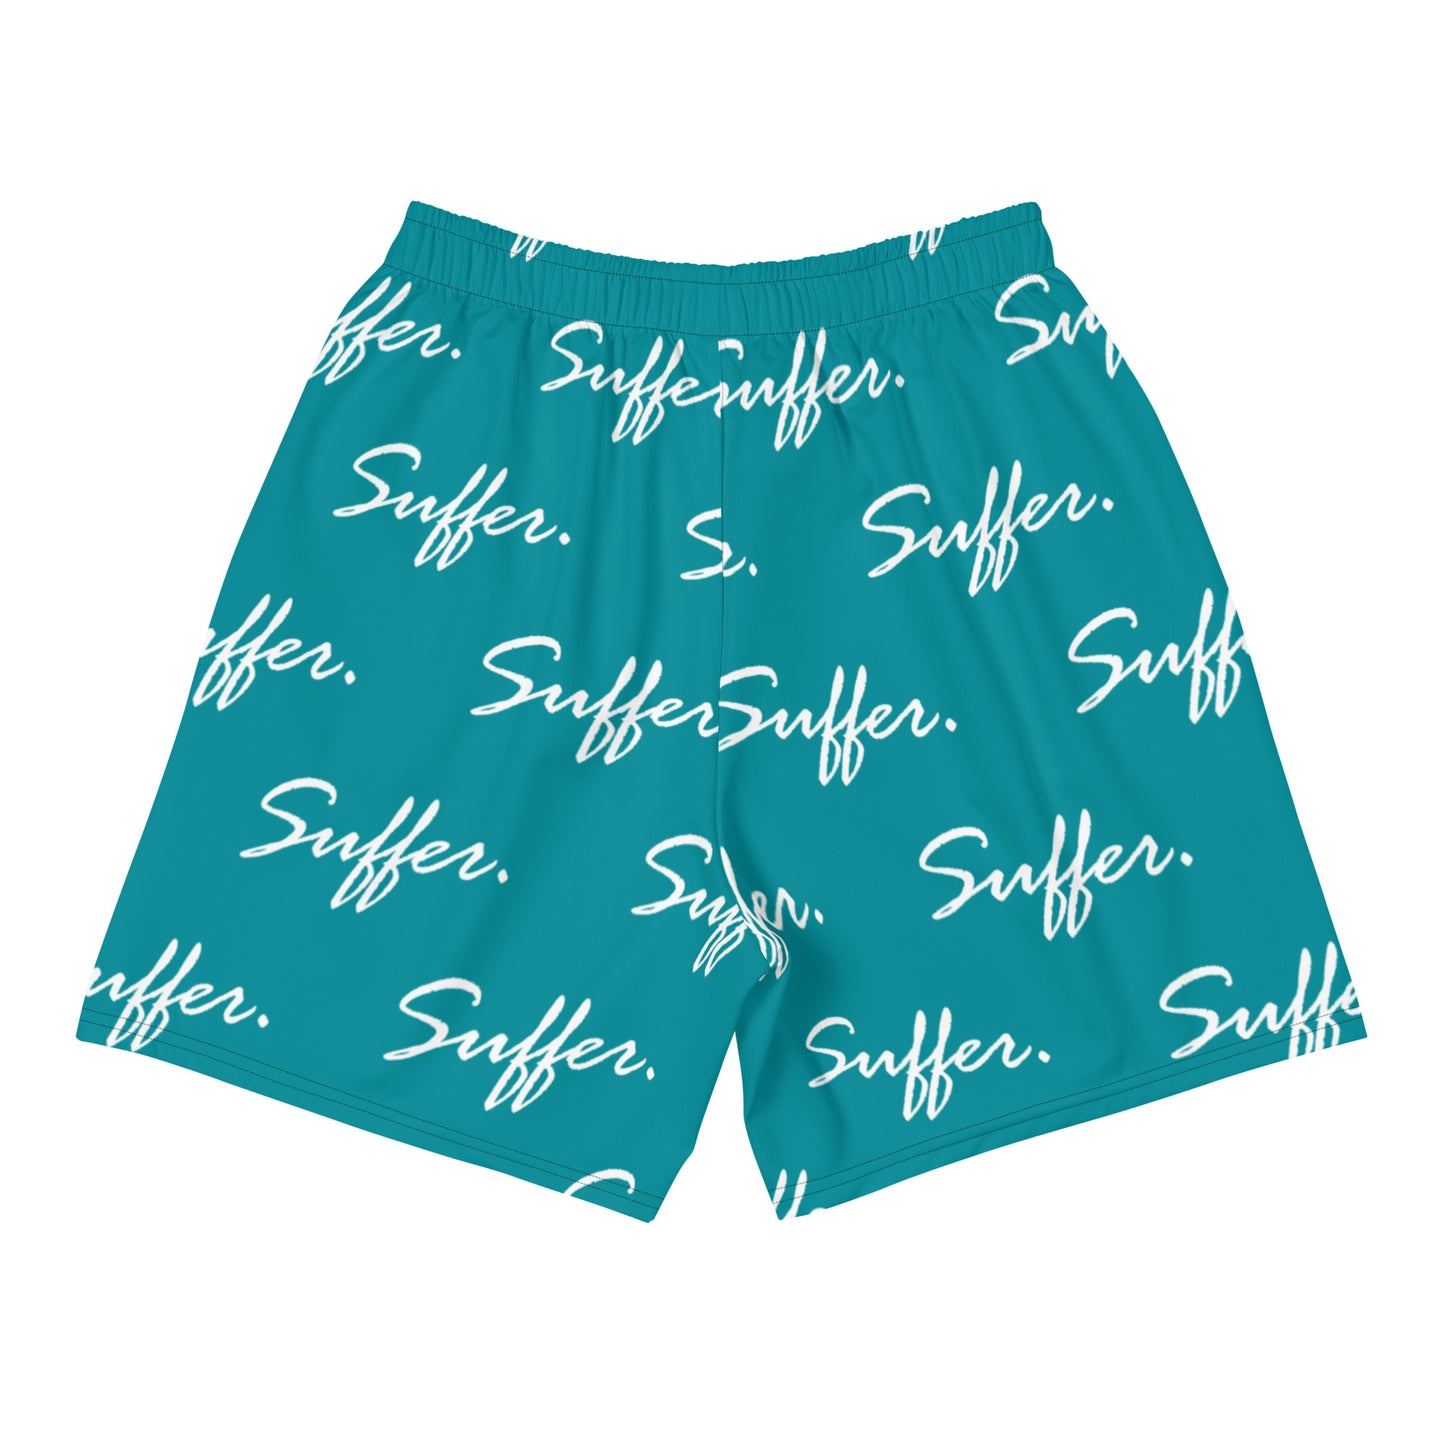 Teal Suffer SigPat Athletic Shorts